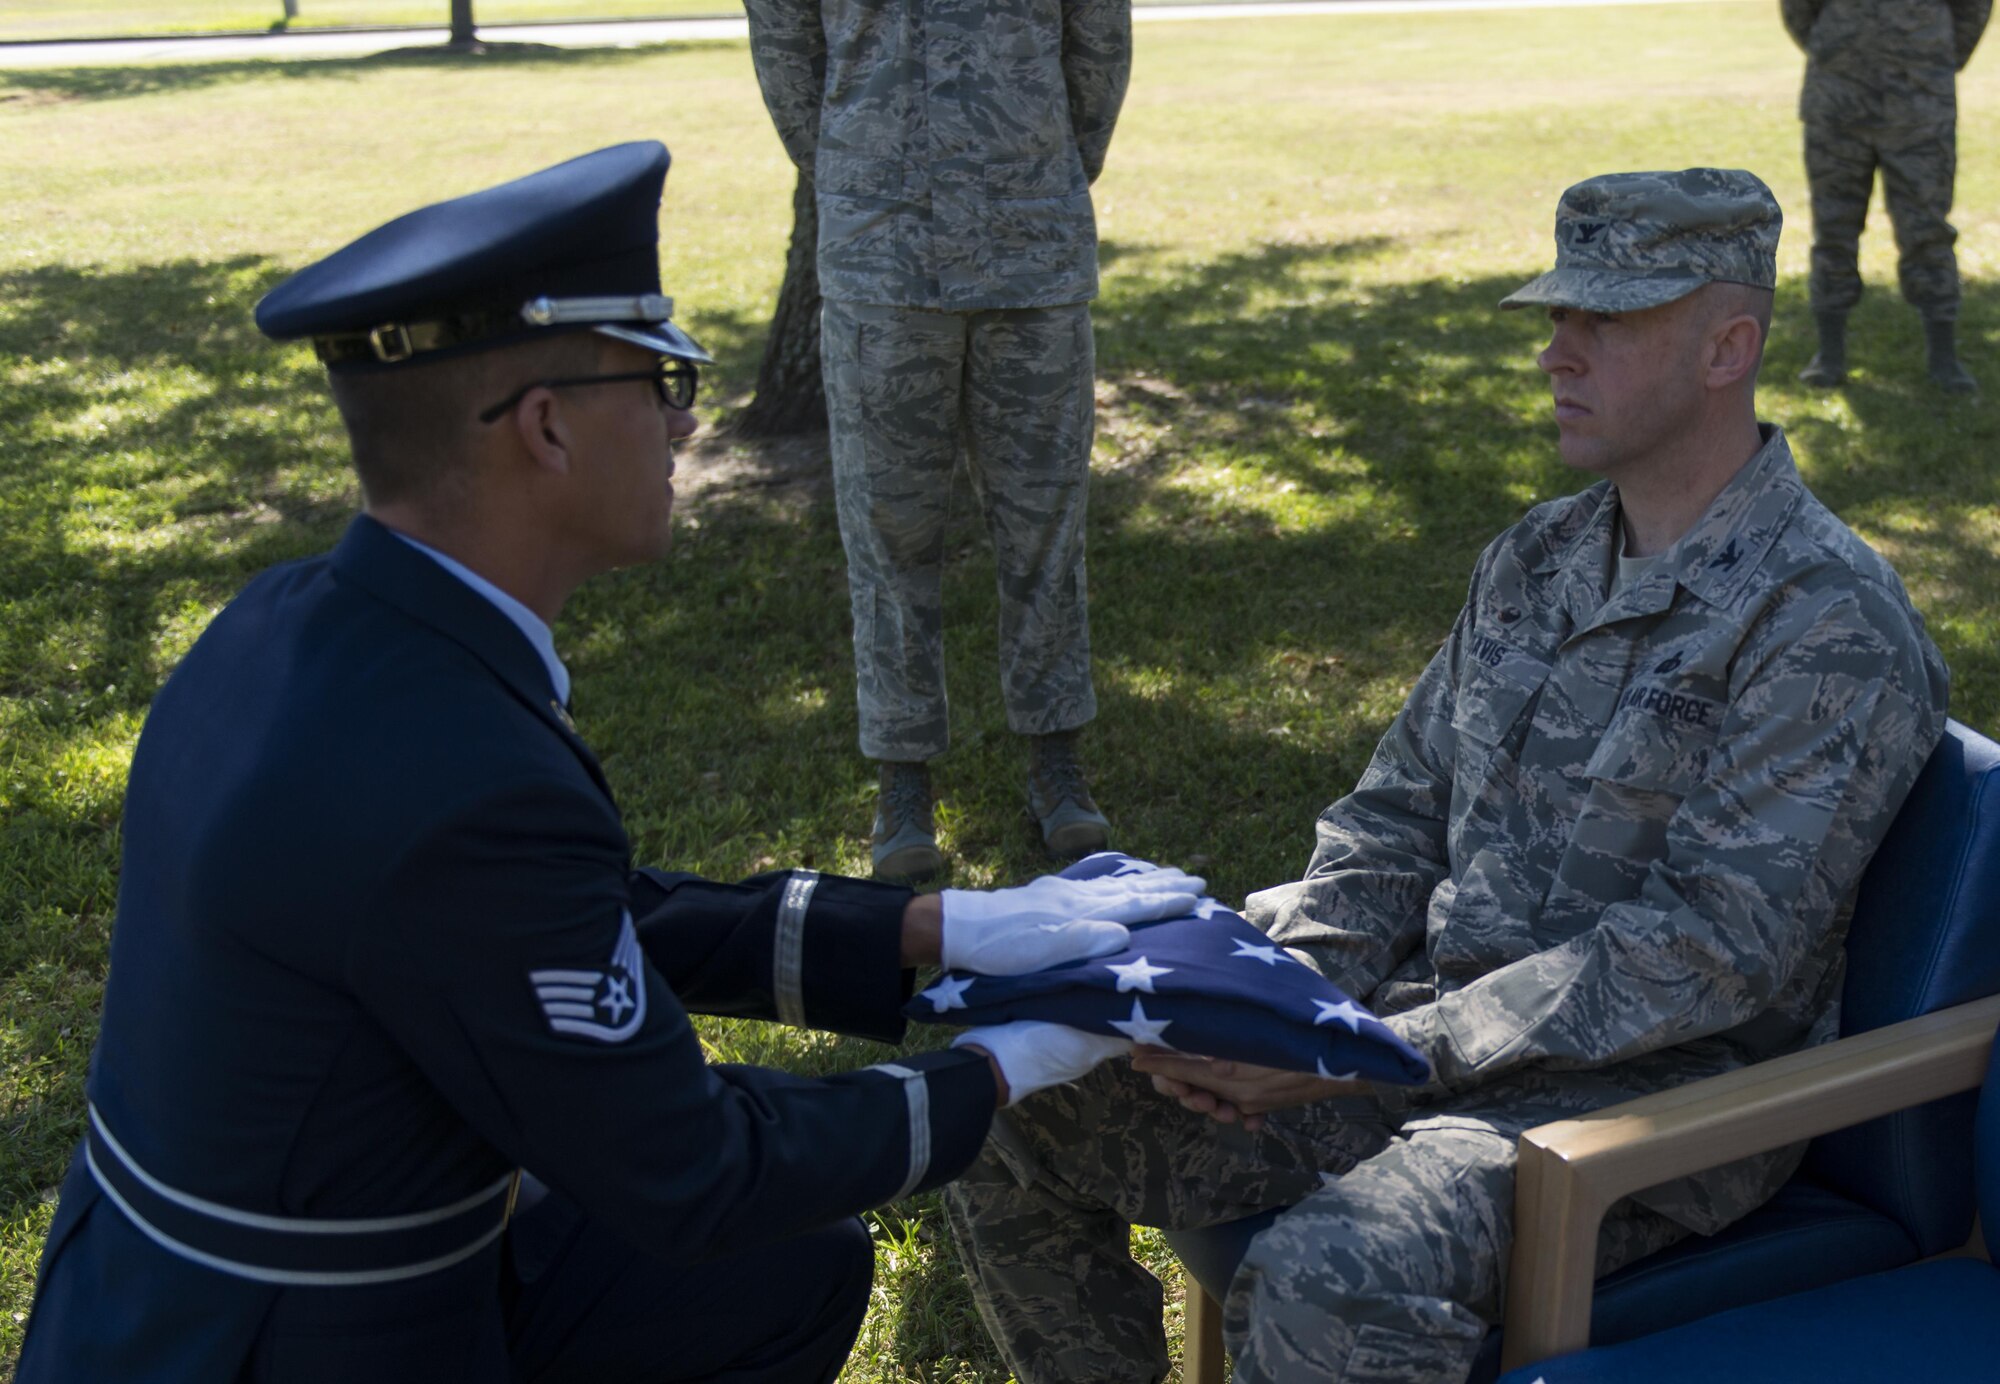 Staff Sgt. Kevin Seney, 335th Training Squadron finance management course instructor, presents the U.S. flag to Col. Danny Davis, 81st Mission Support Group commander, during a mock active duty funeral Oct. 12, 2016, on Keesler Air Force Base, Miss. Keesler Honor Guard members were trained on the proper wear of the ceremonial uniform, firing party, presentation of the colors and pallbearer duties during an eight day course with the Air Force Honor Guard Mobile Training Team. The team ended the training with a mock active duty funeral and graduation ceremony. (U.S. Air Force photo by Andre’ Askew/Released)

